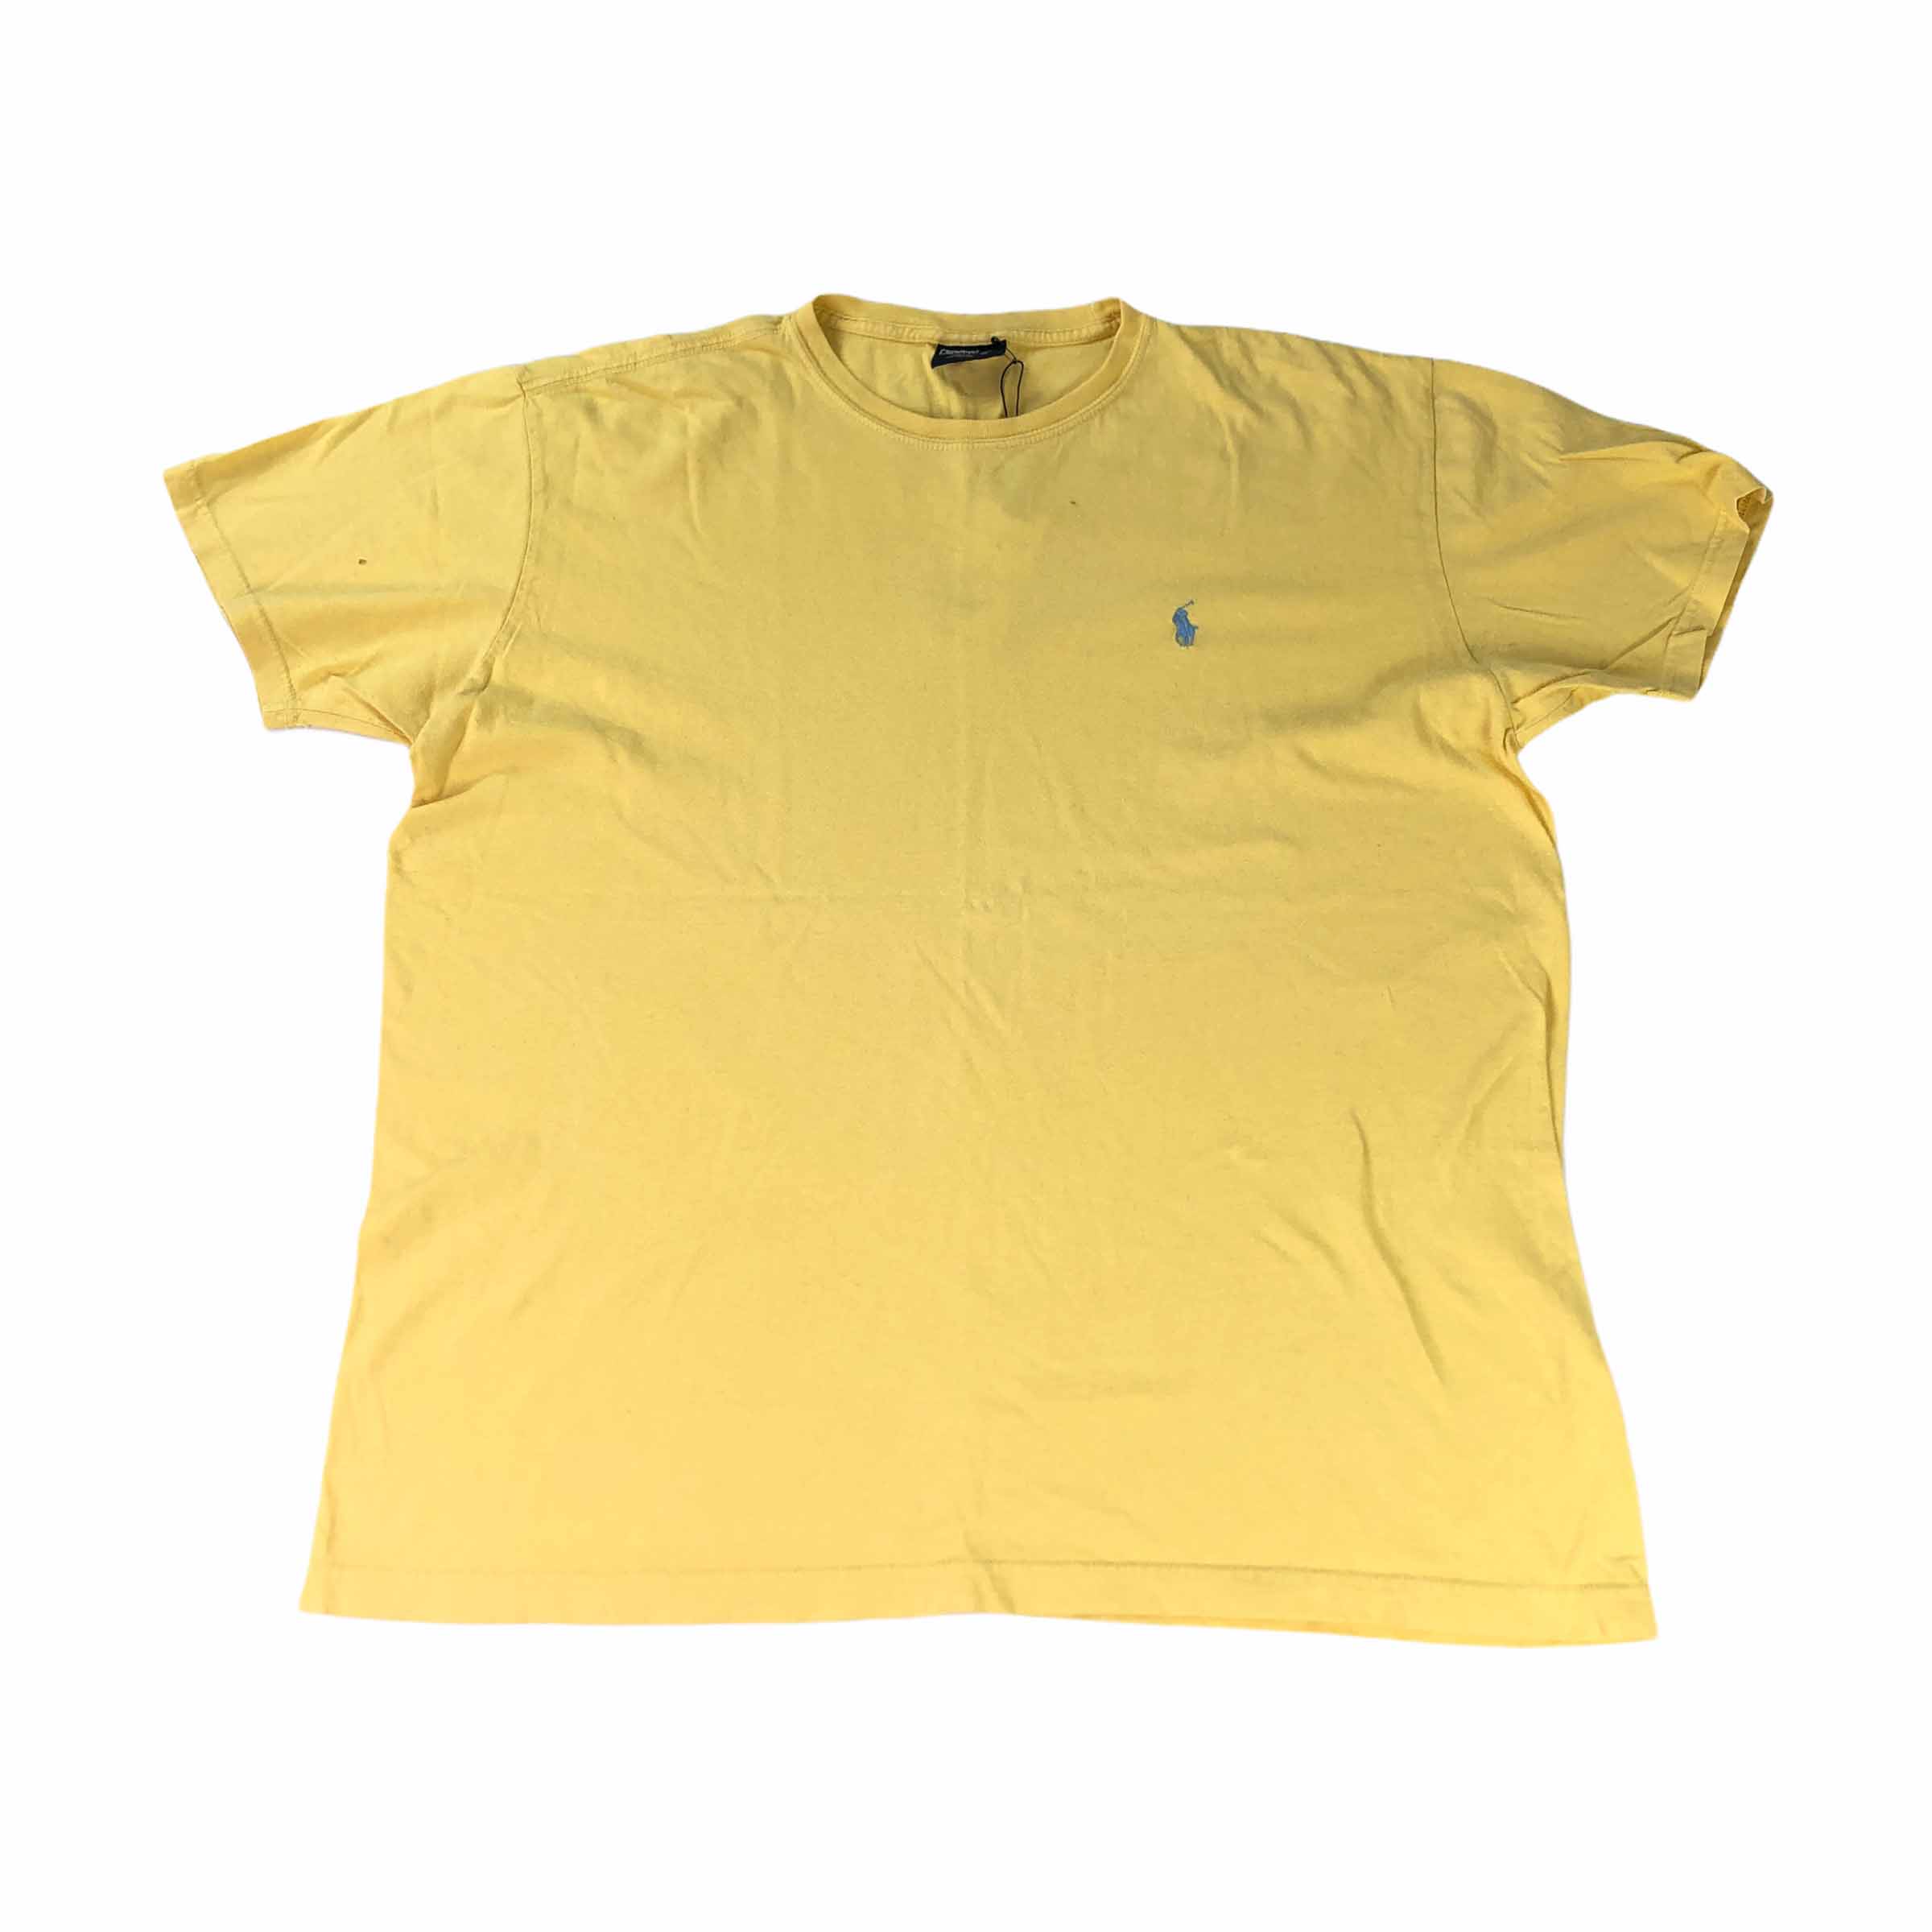 [Polo by Ralph Lauren] Yellow Tshirt - Size M